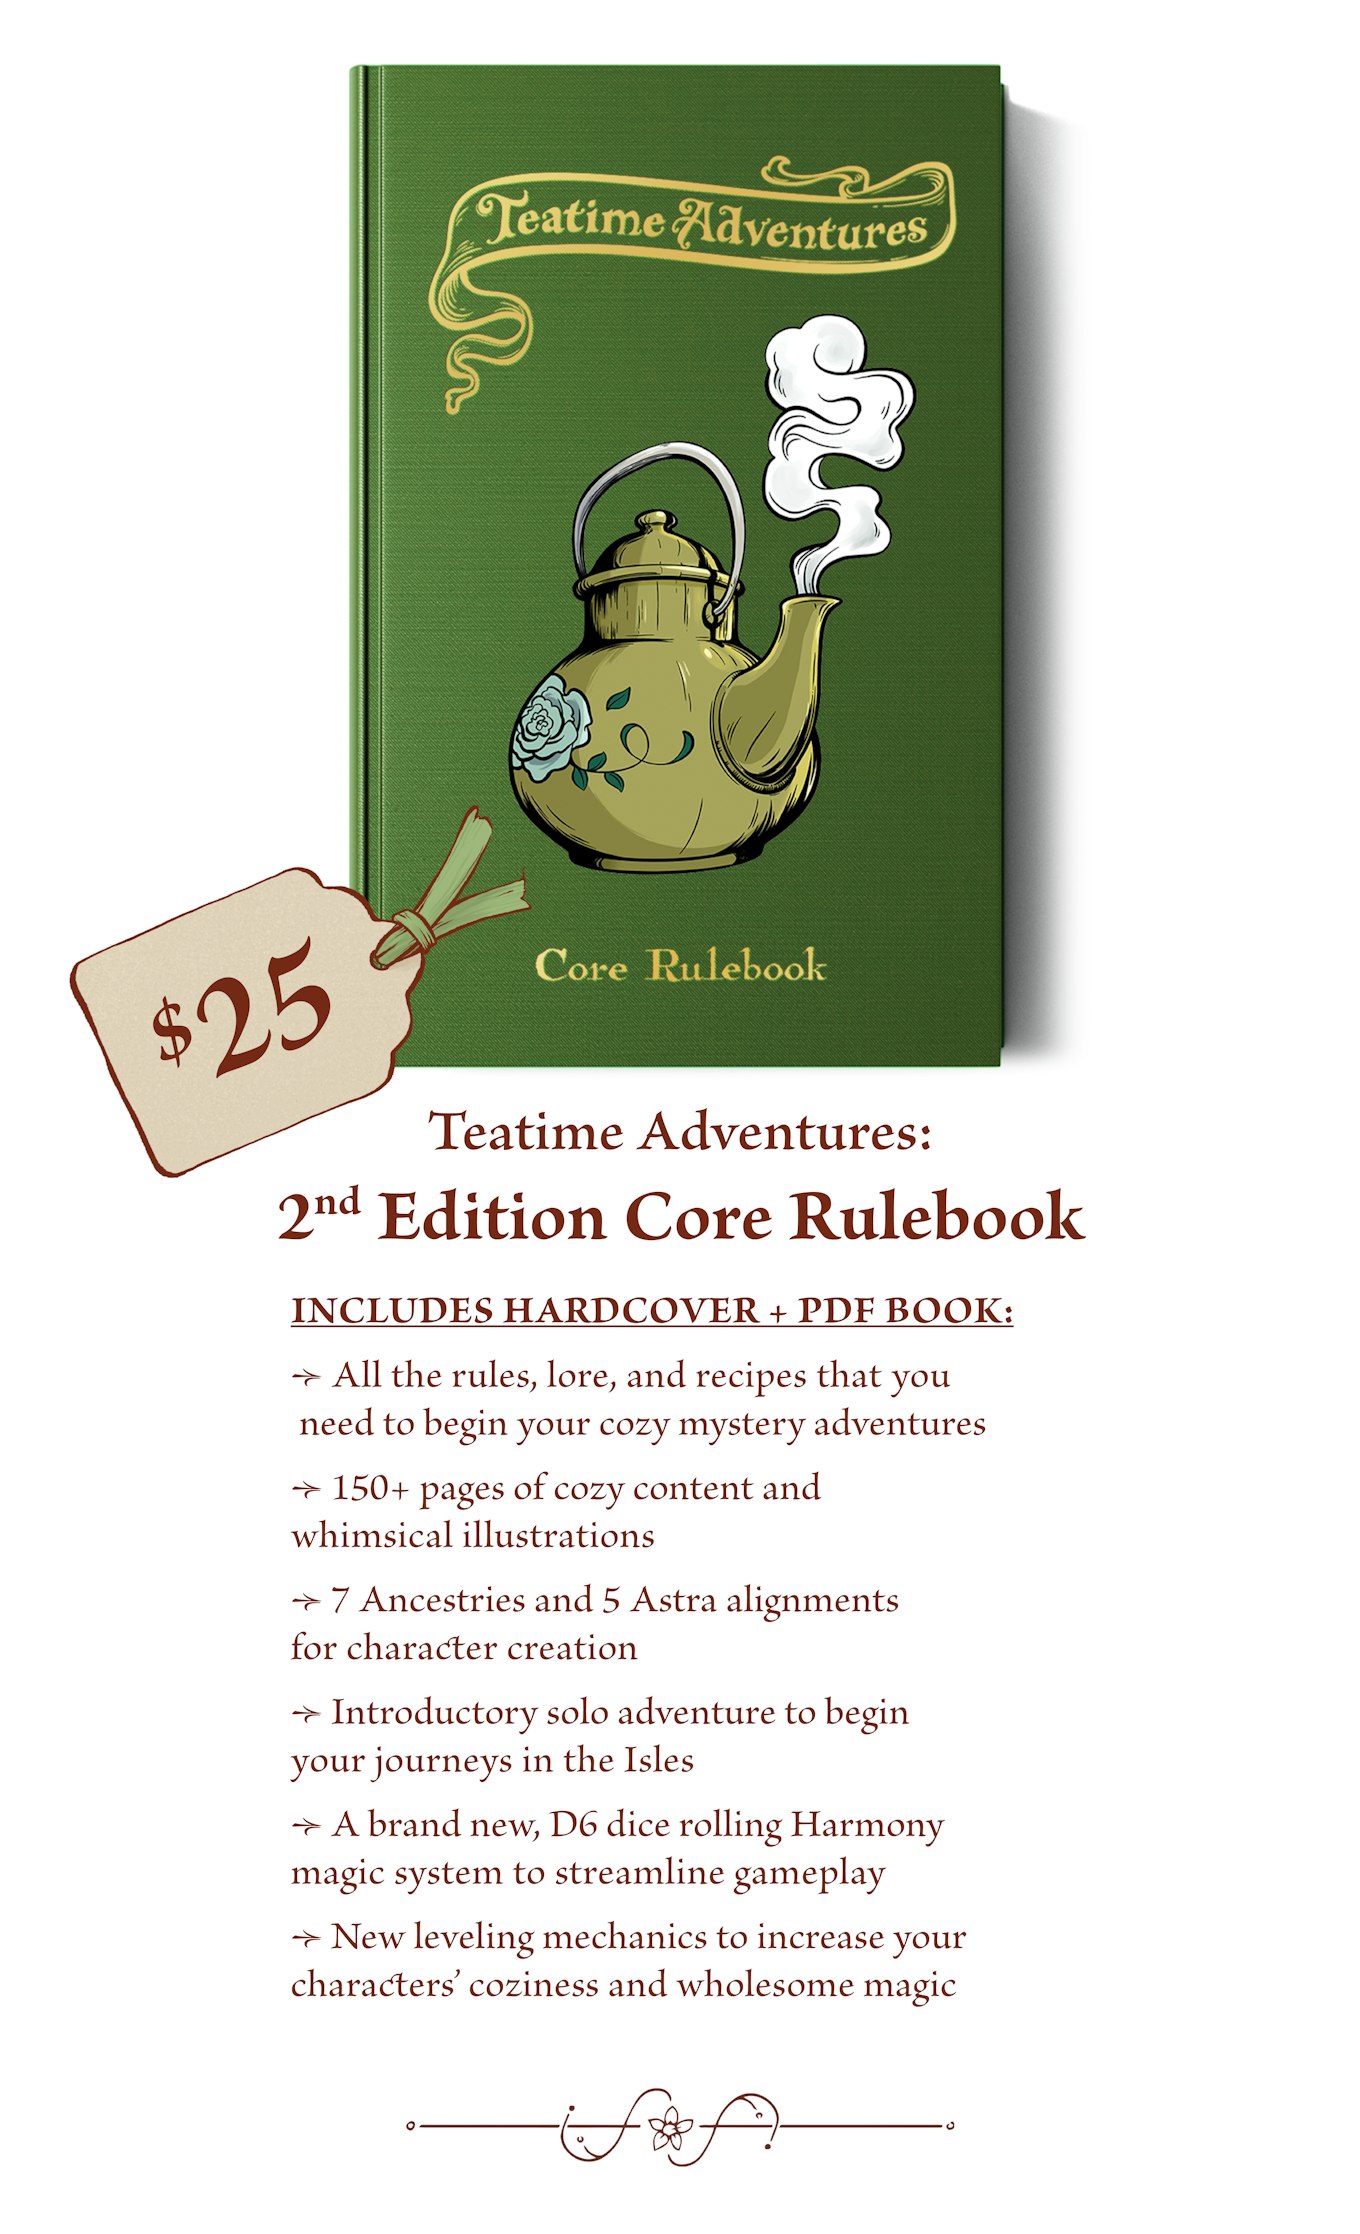 $25 - The Teatime Adventures: 2nd Edition Core Rulebook includes: All the rules, lore, and recipes that you need to begin your cozy mystery adventures. 150+ pages of cozy content and whimsical illustrations. 7 Ancestries and 5 Astra alignments for character creation. Introductory solo adventure to begin your journeys in the Isles. A brand new, D6 dice rolling Harmony magic system to streamline gameplay. New leveling mechanics to increase your characters’ coziness and wholesome magic 